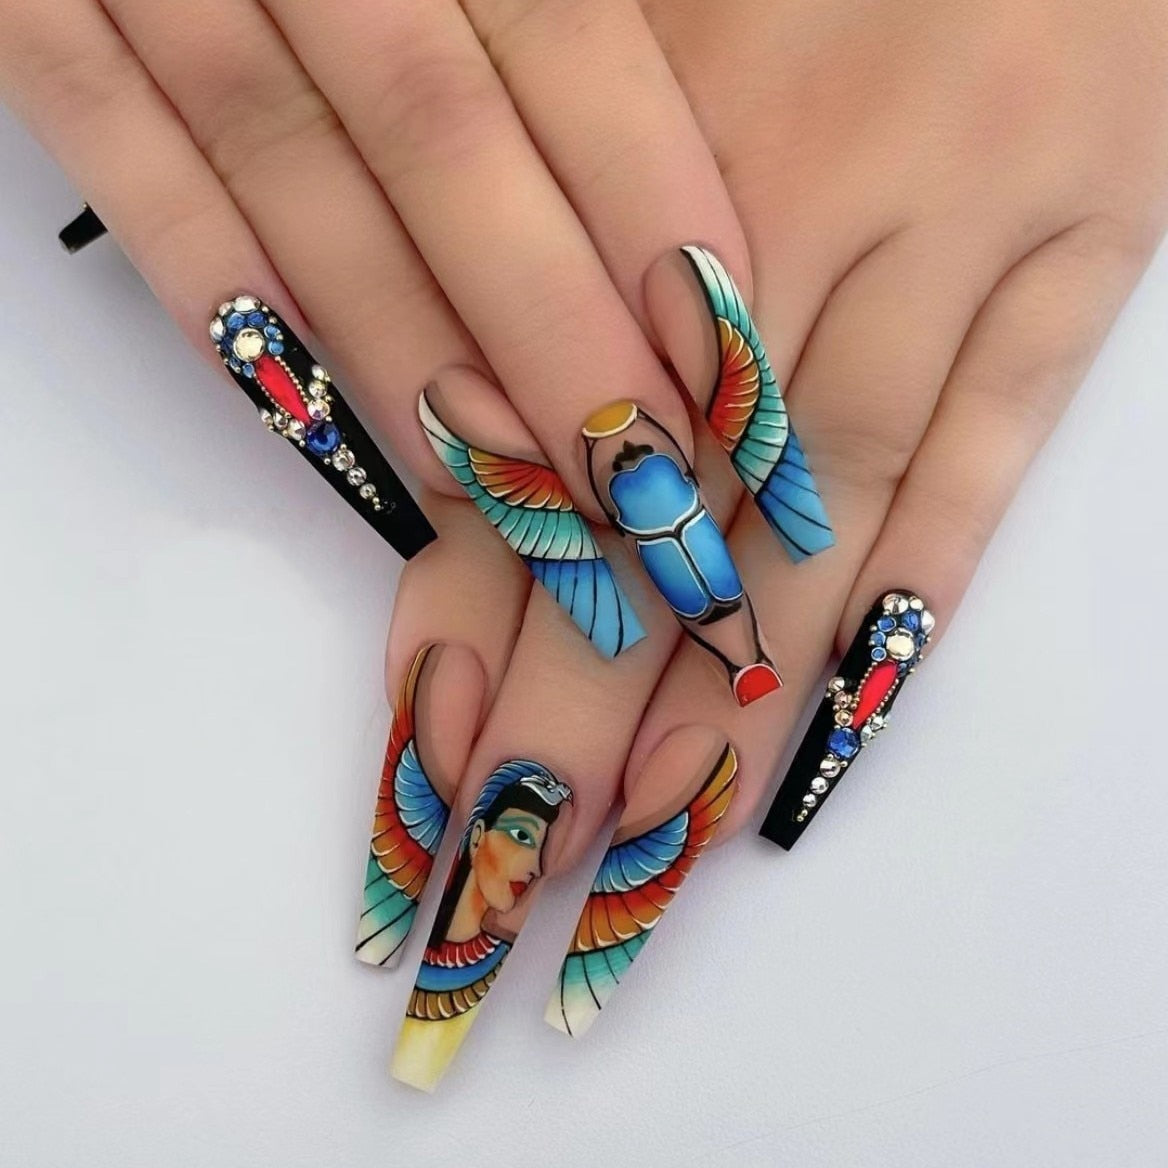 3D fake nails Peacock girl designs French long coffin tips press on faux ongles tips DIY manicure supplies false acrylic nails